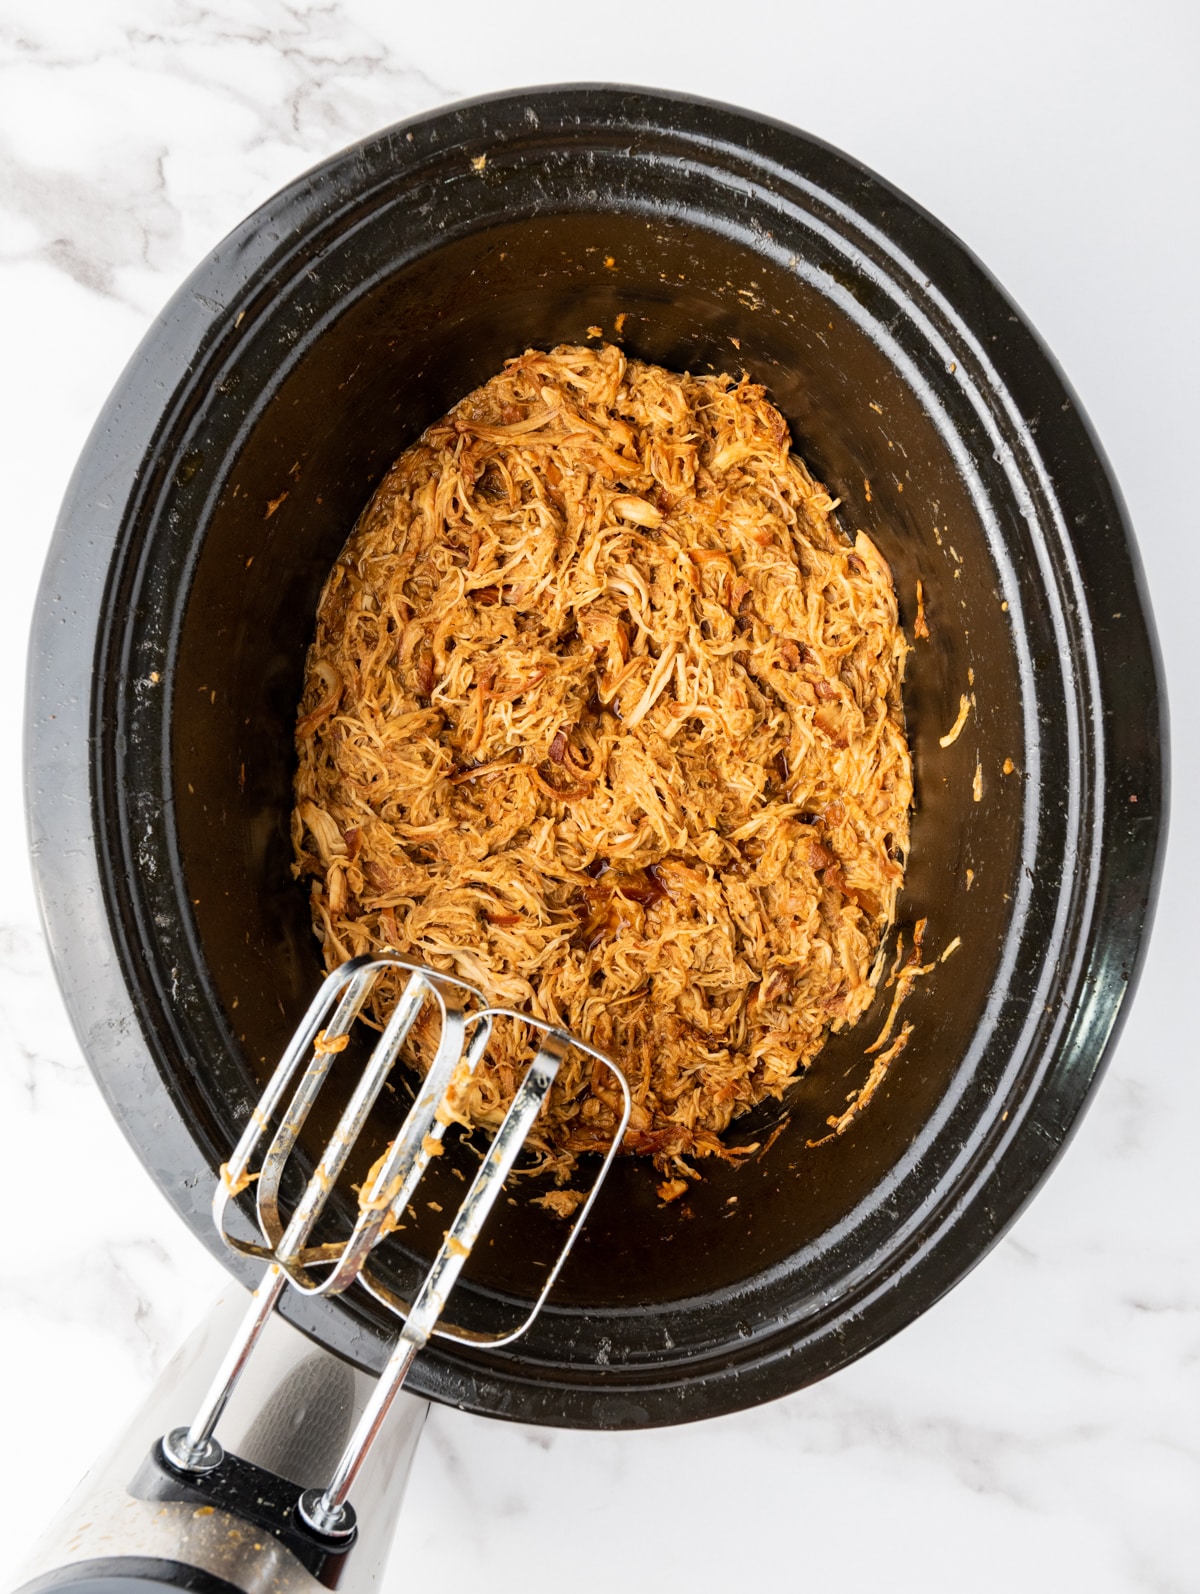 Shredded honey garlic chicken inside a slow cooker with a hand beater on the side, on top of a marble surface.